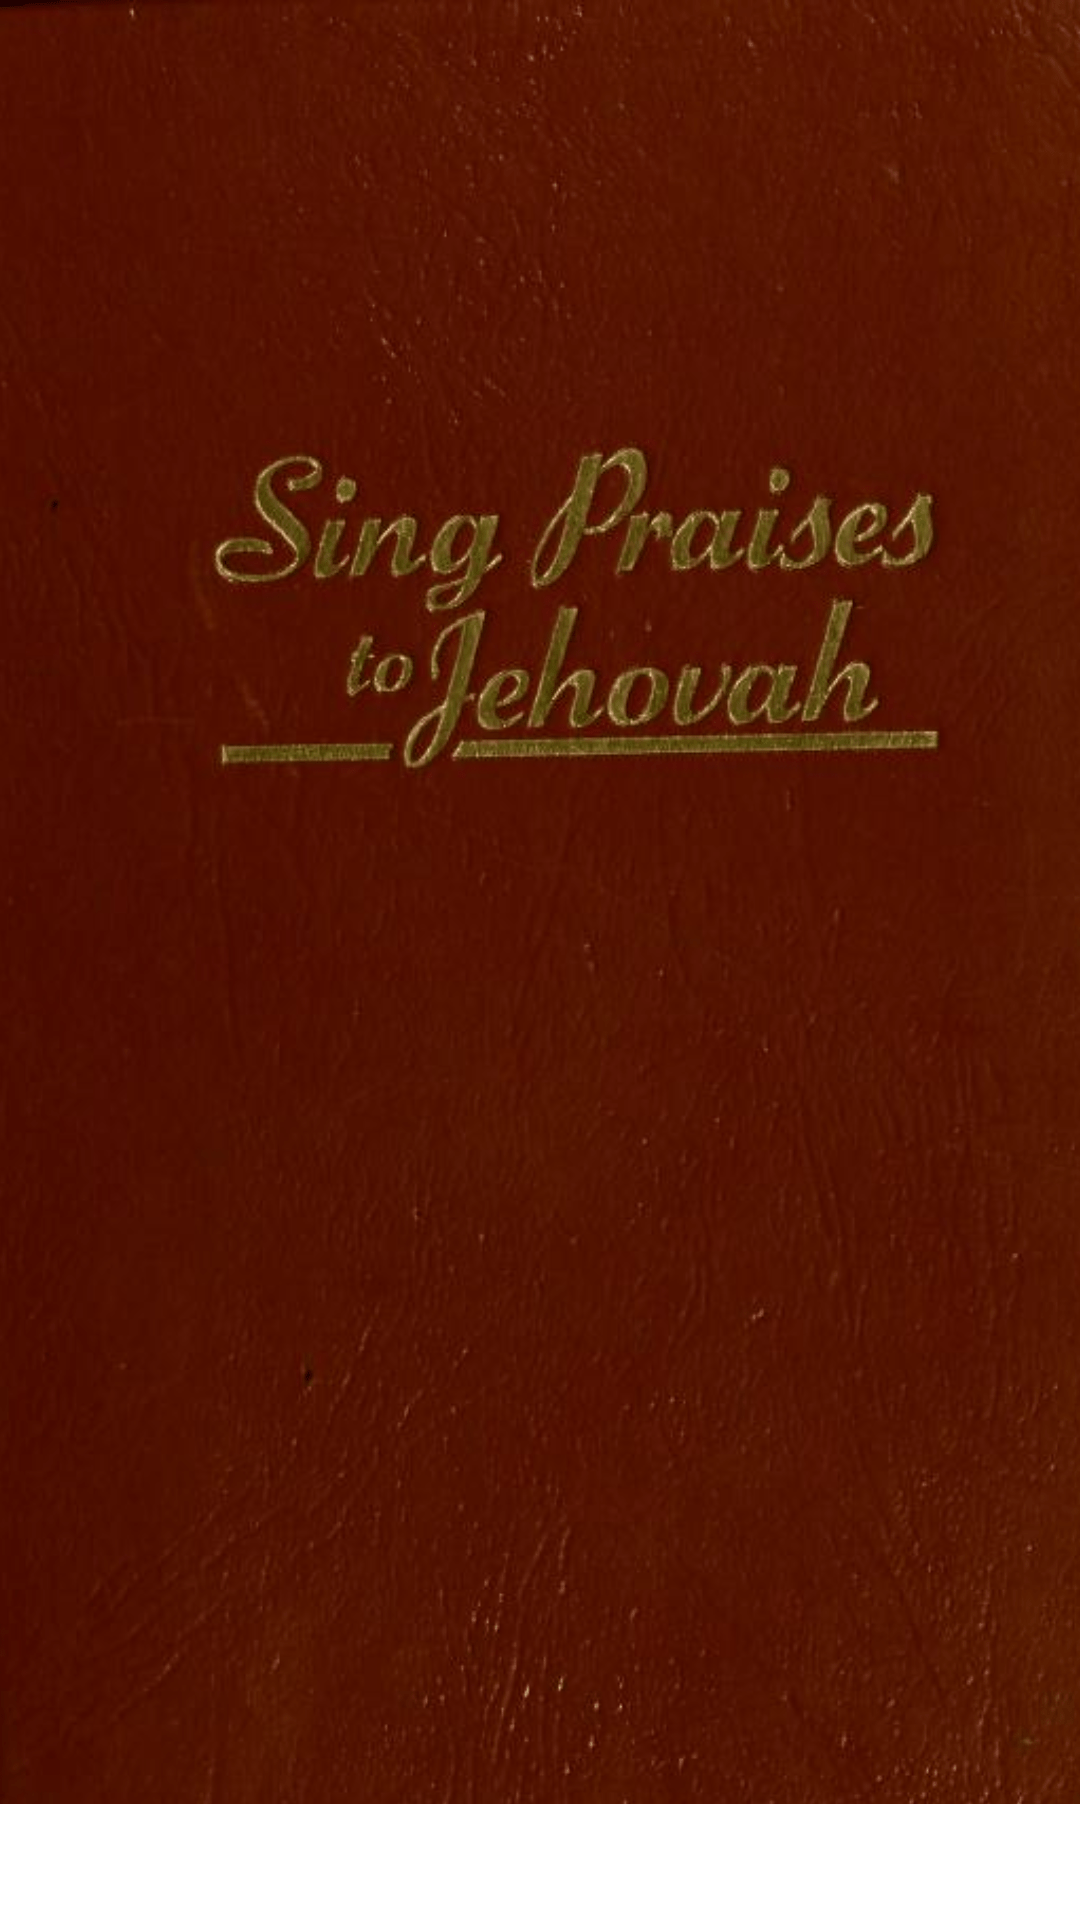 Sing Praises to Jehovah